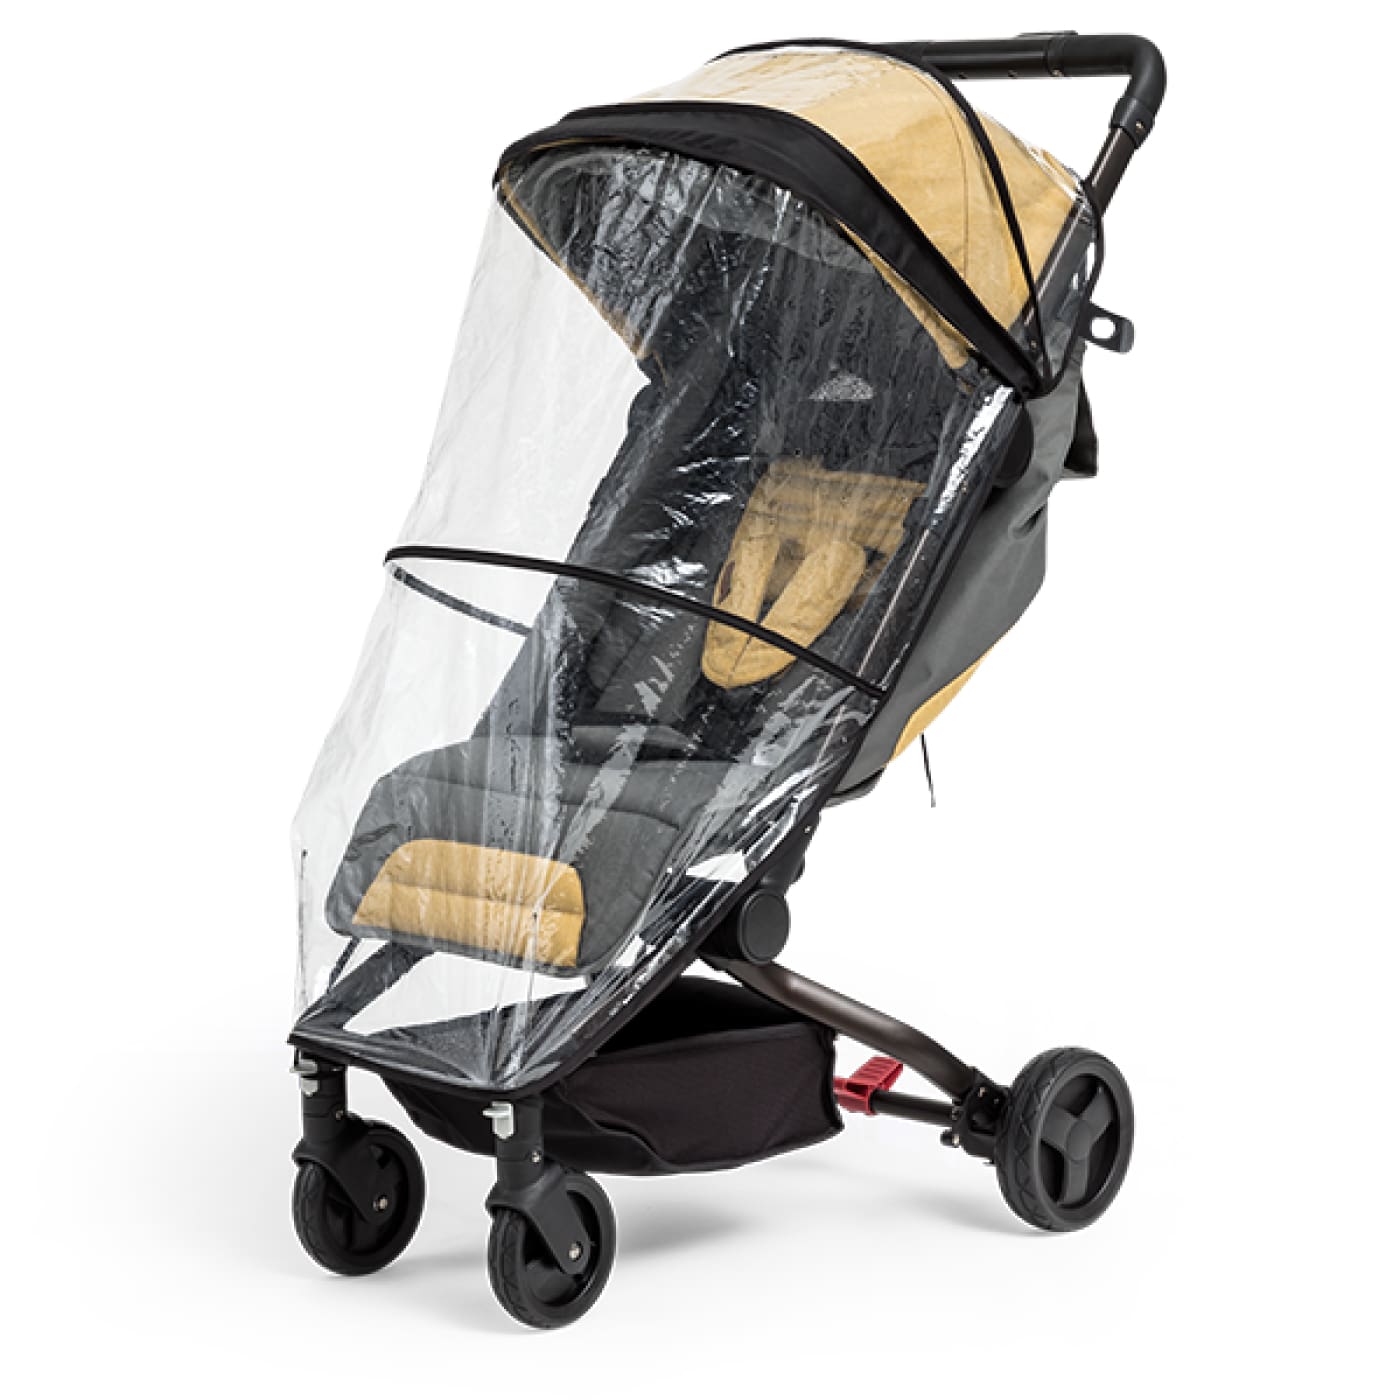 Edwards & Co Otto Rain Cover - PRAMS & STROLLERS - SUN COVERS/WEATHER SHIELDS